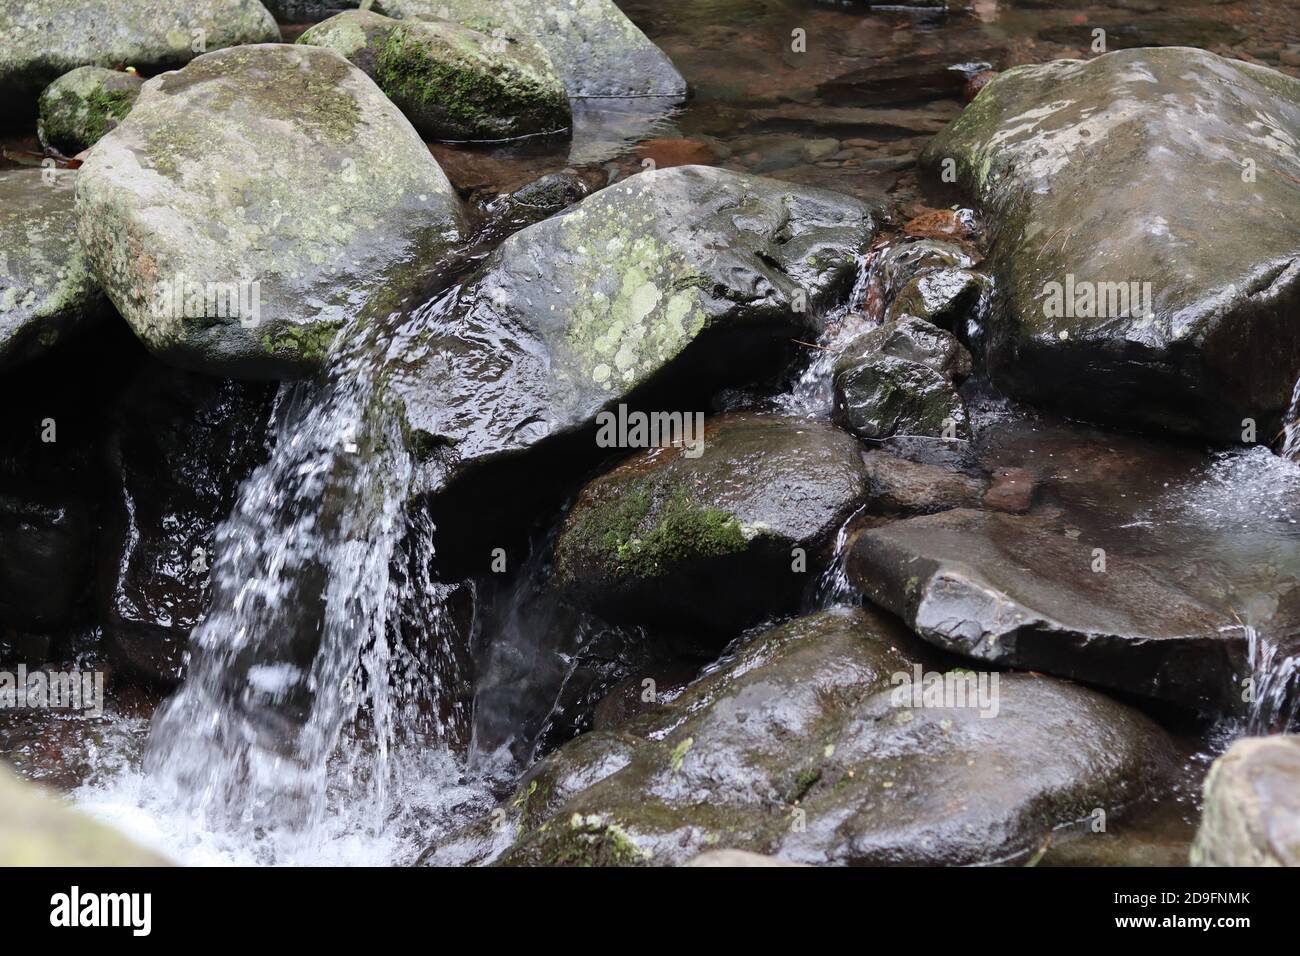 very clear river water flowing between the rocks Stock Photo